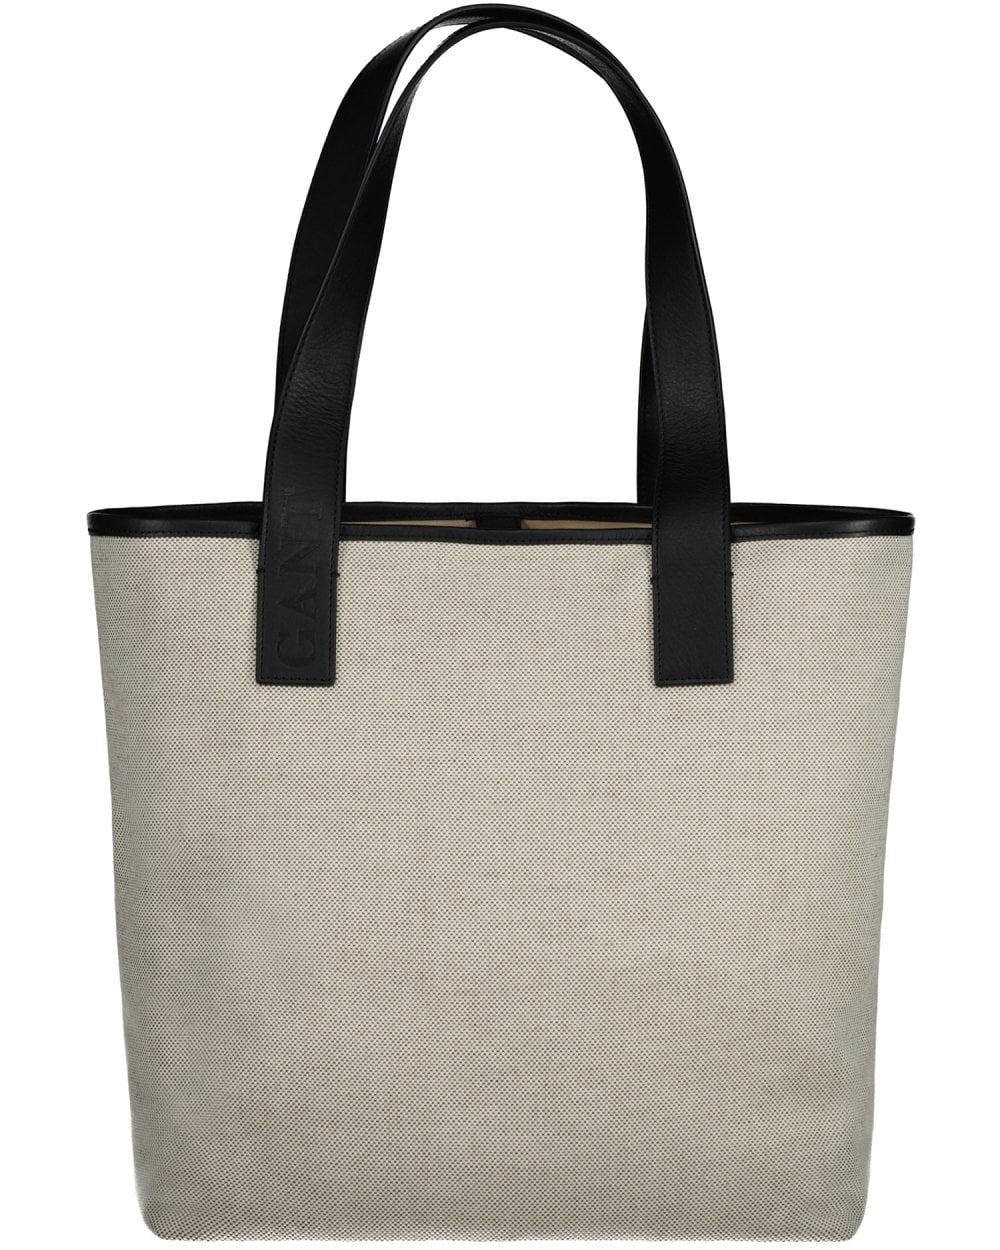 Mid-Sized Canvas Tote